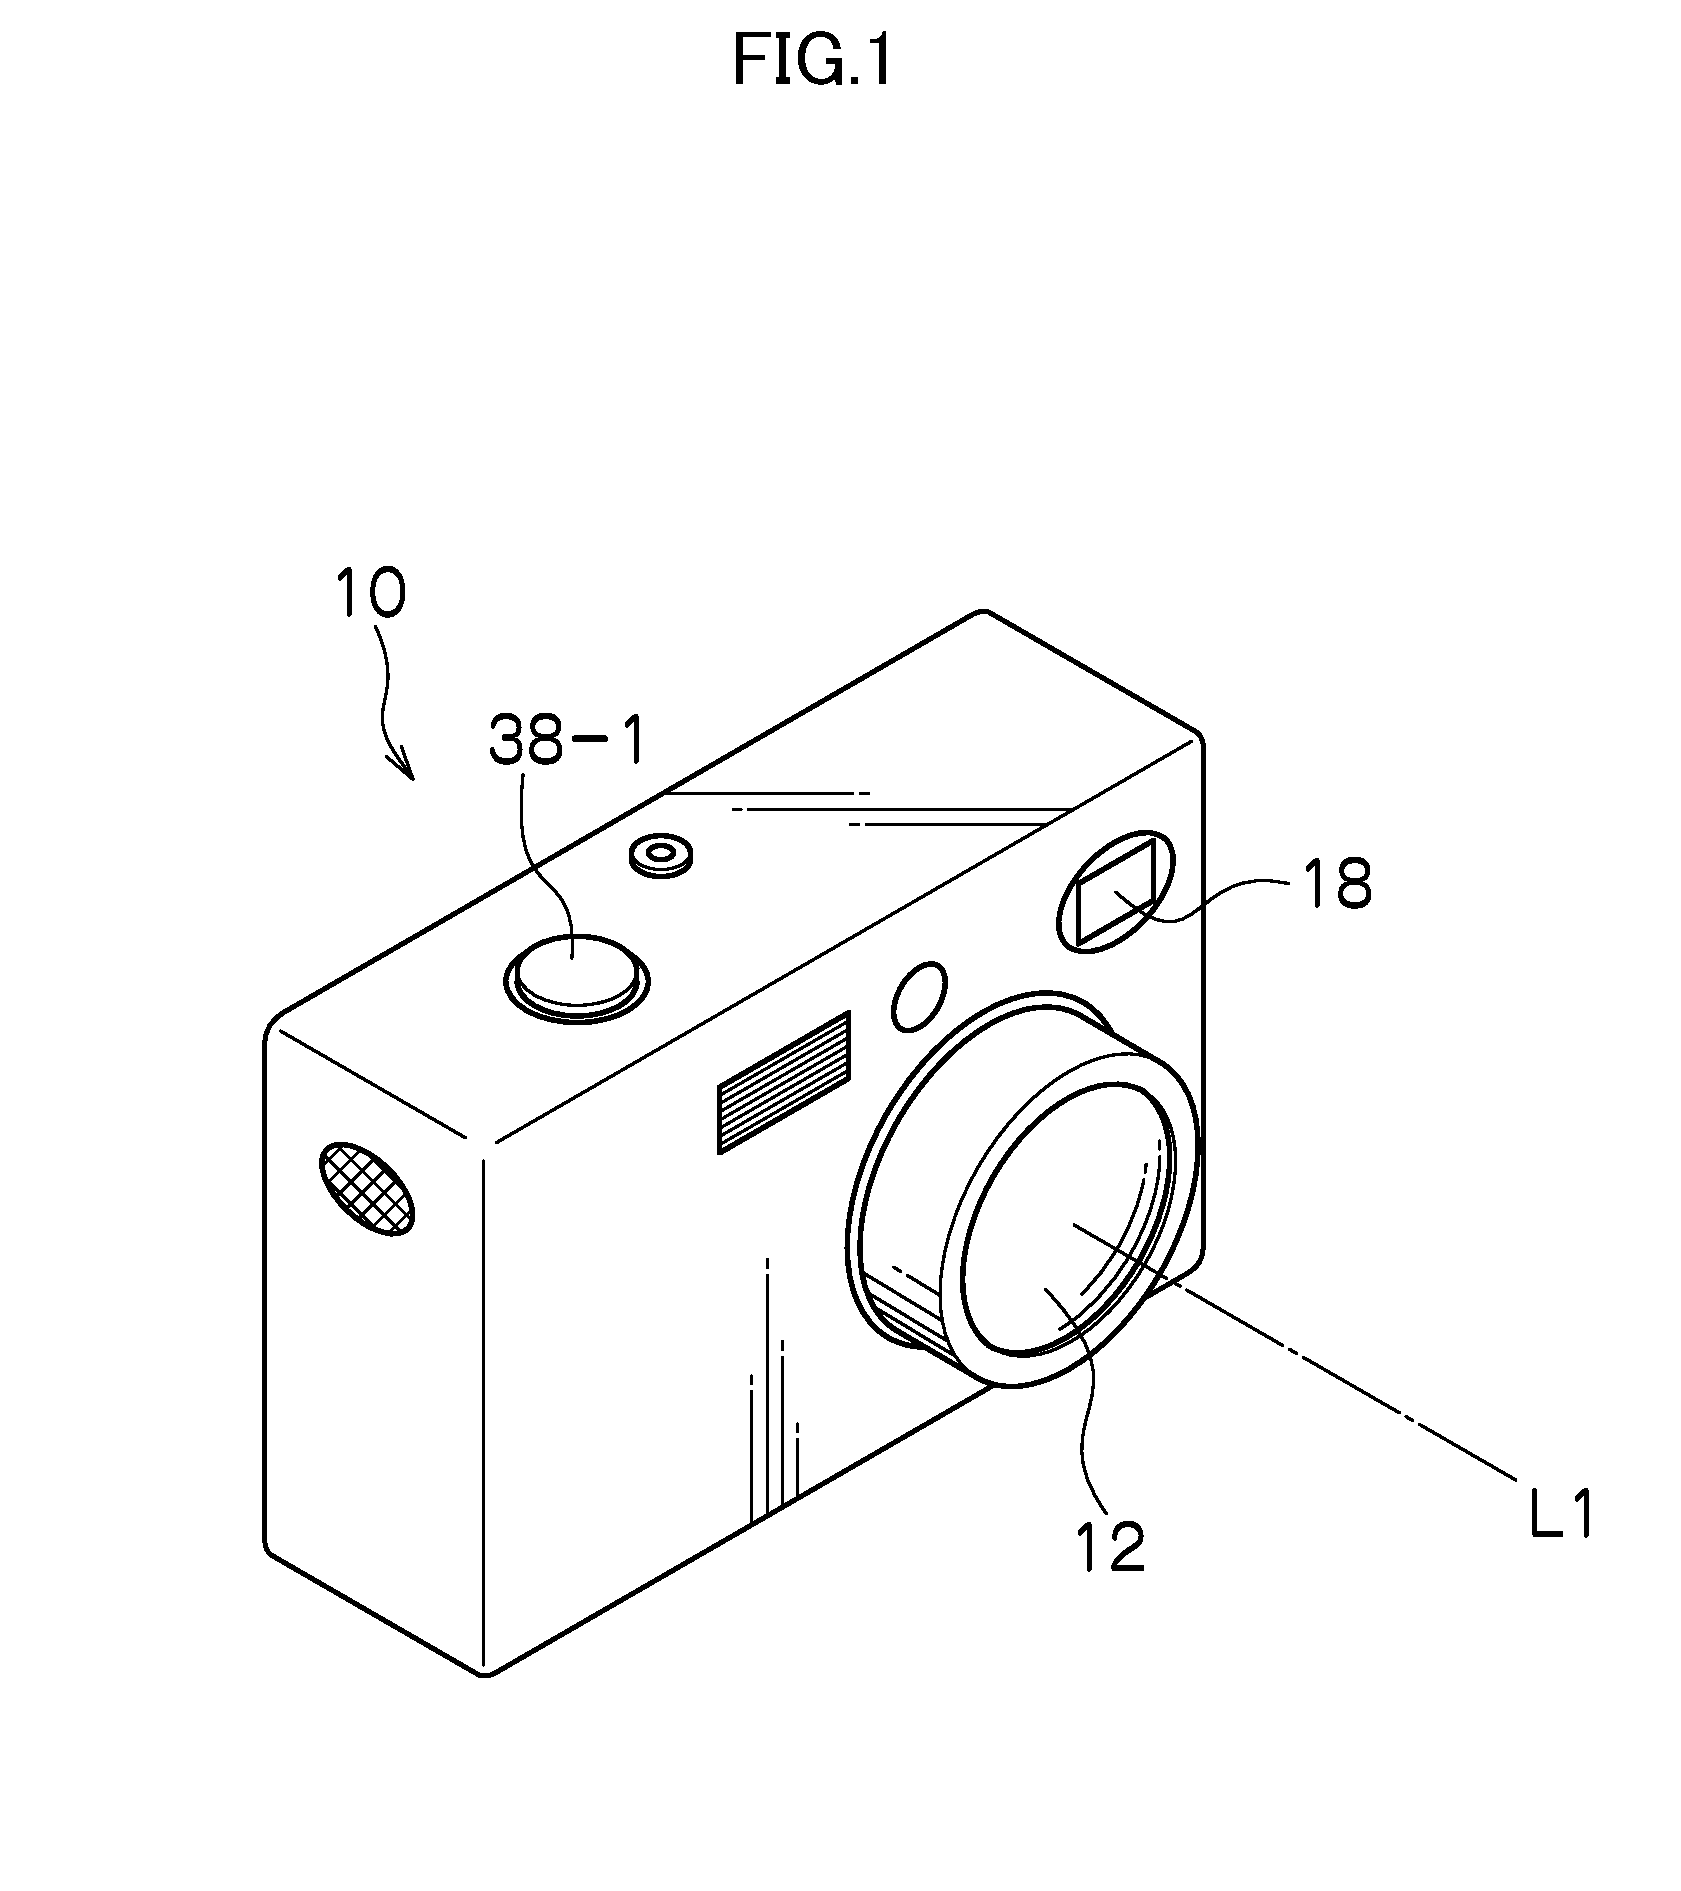 Imaging  device